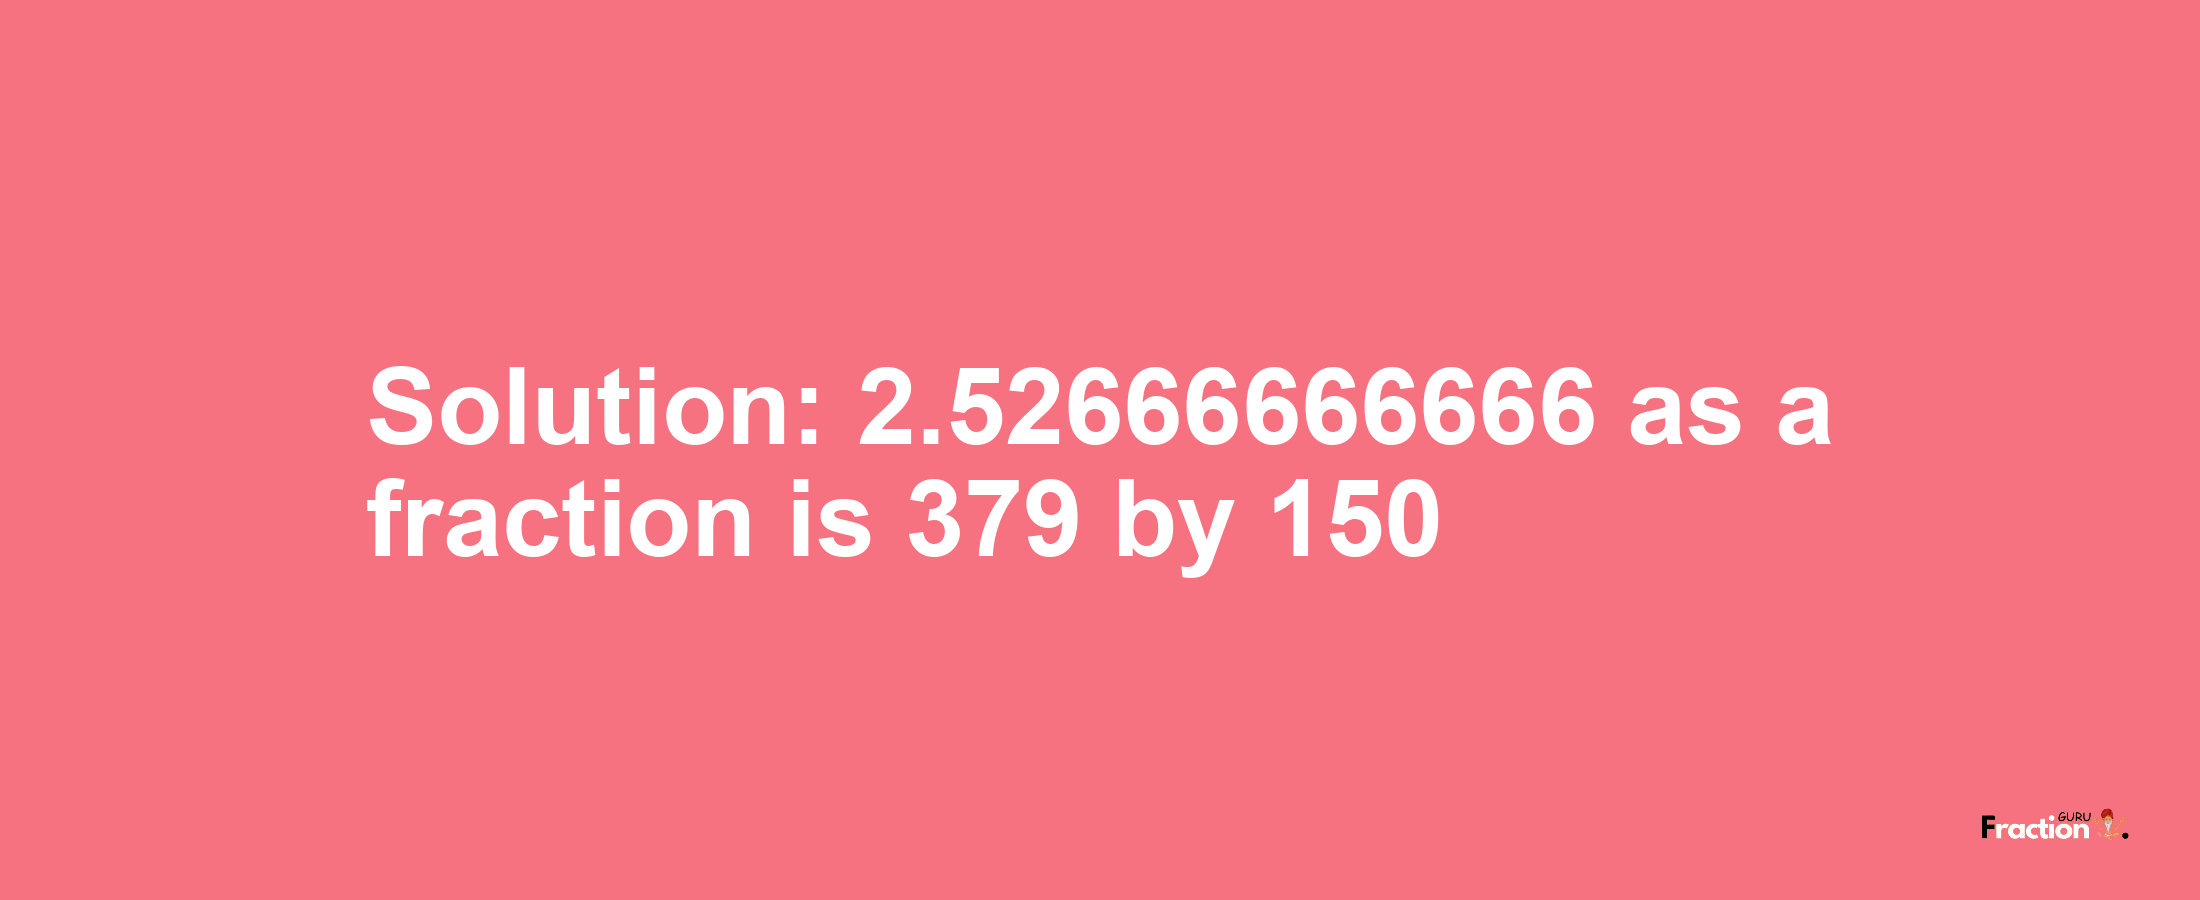 Solution:2.52666666666 as a fraction is 379/150